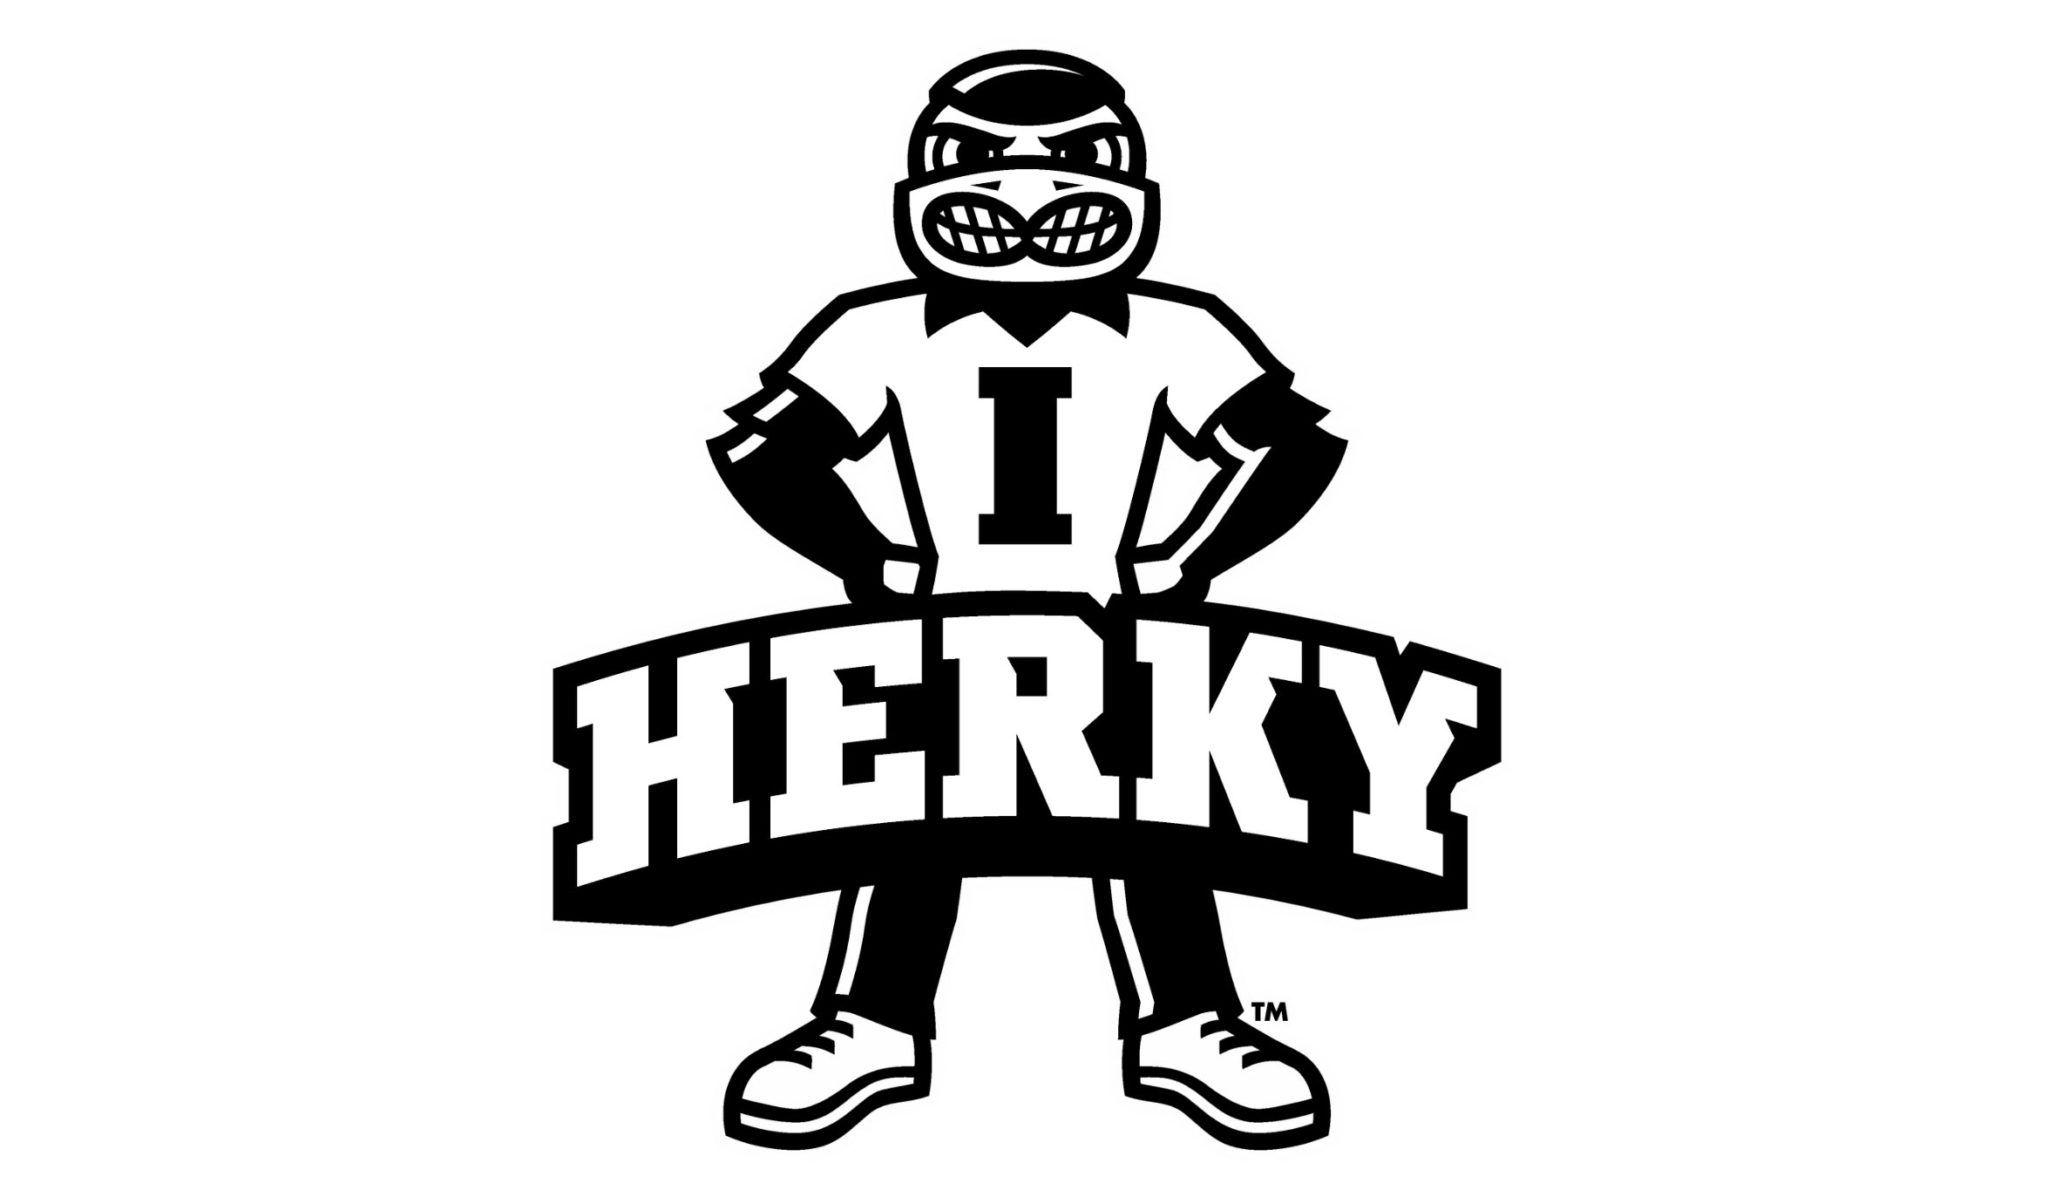 Black and White Hawkeye Logo - The Hawkeyes and Herky | University of Iowa Licensing Department